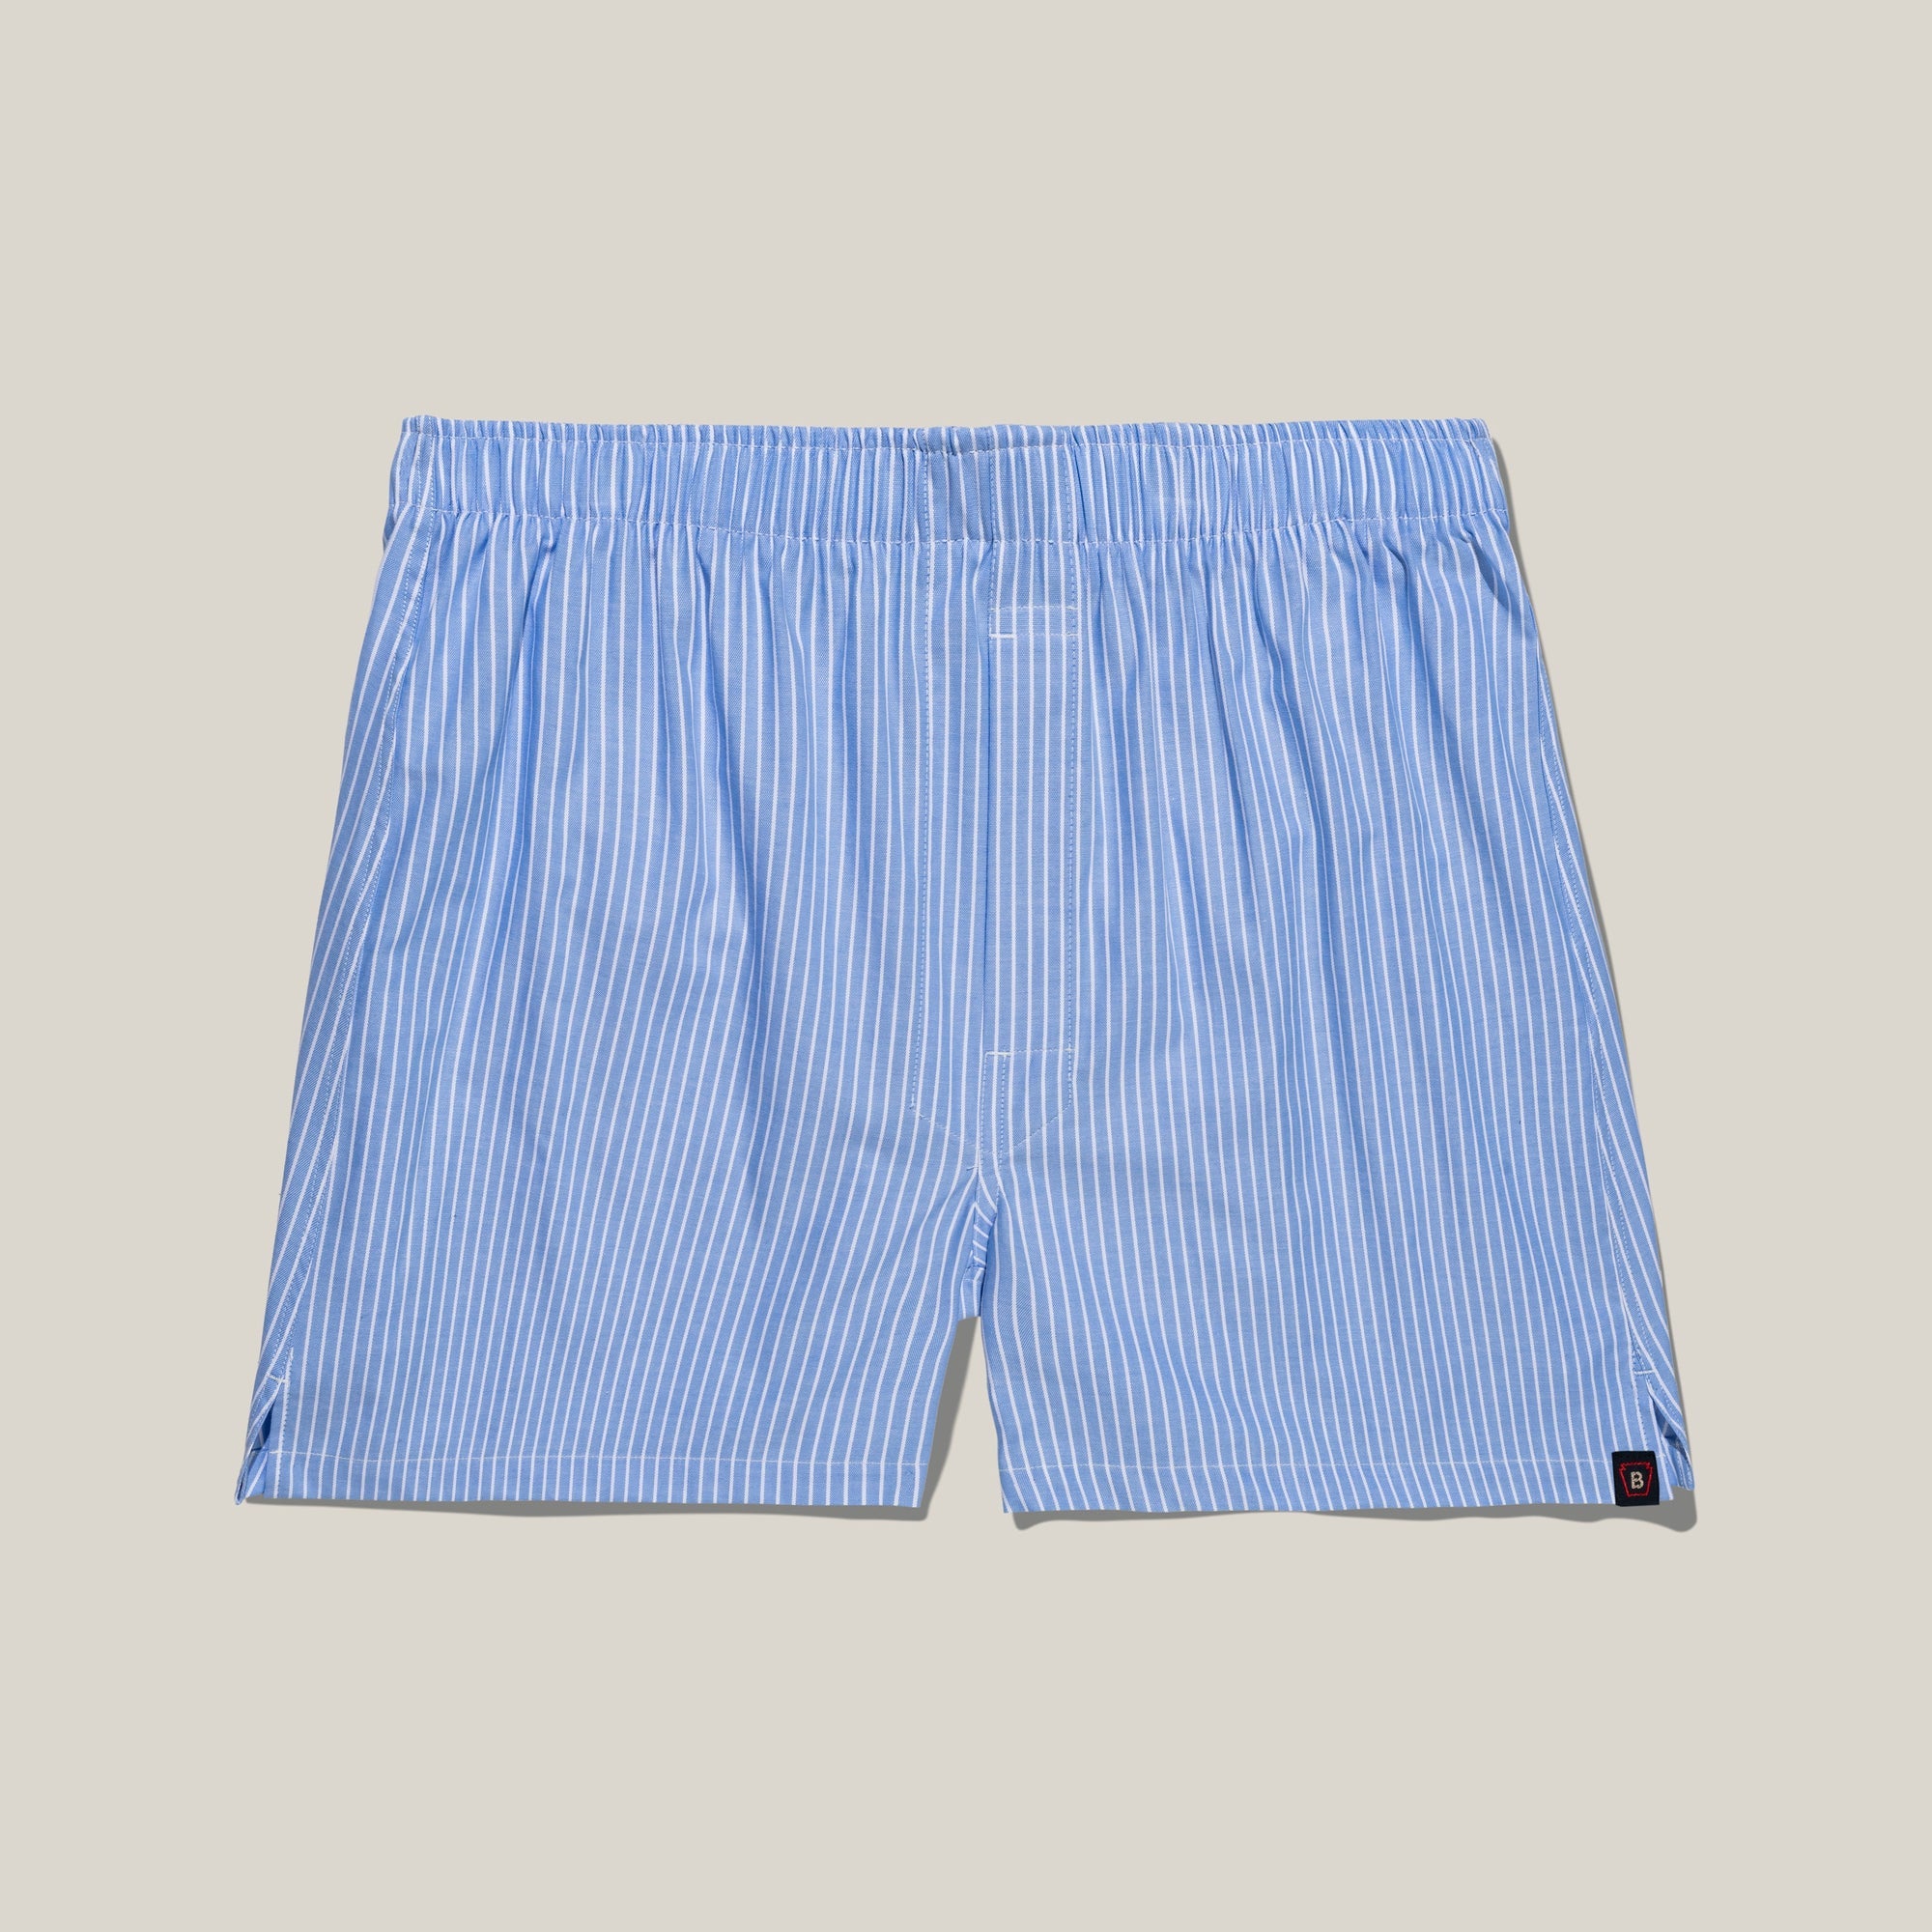 University Stripe Cotton Boxer in Light Blue and White by Bills Khakis